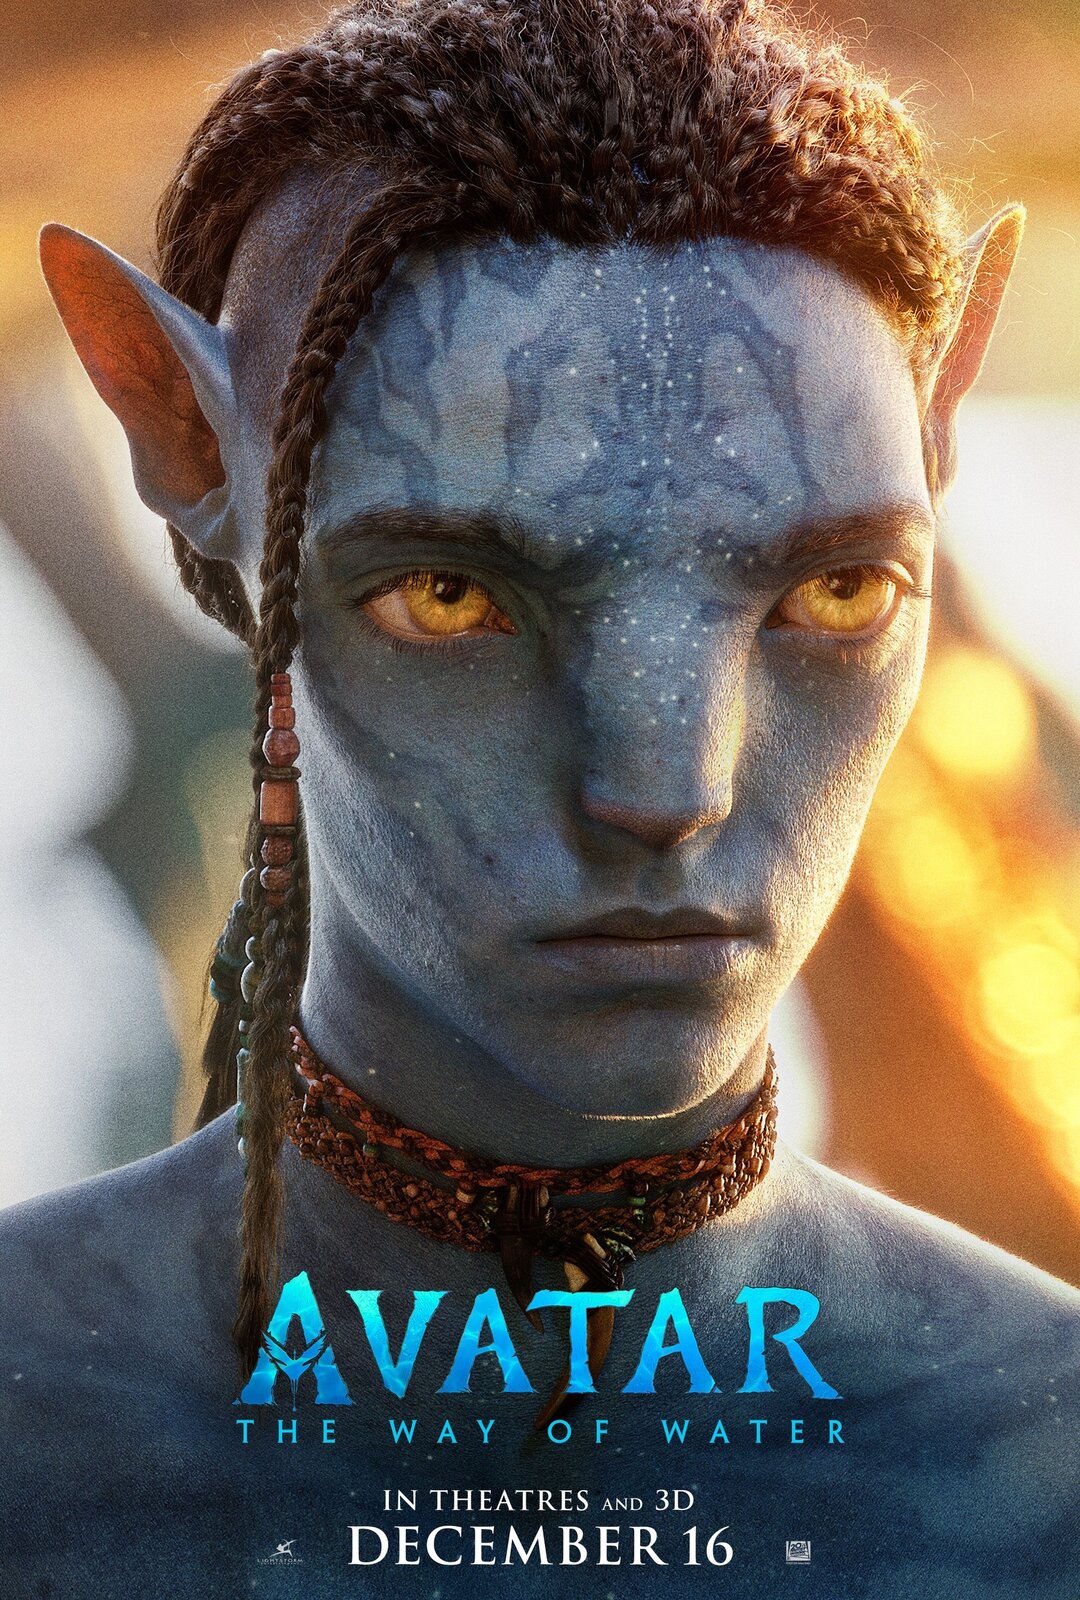 How to watch Avatar 2 The Way of Water  Space